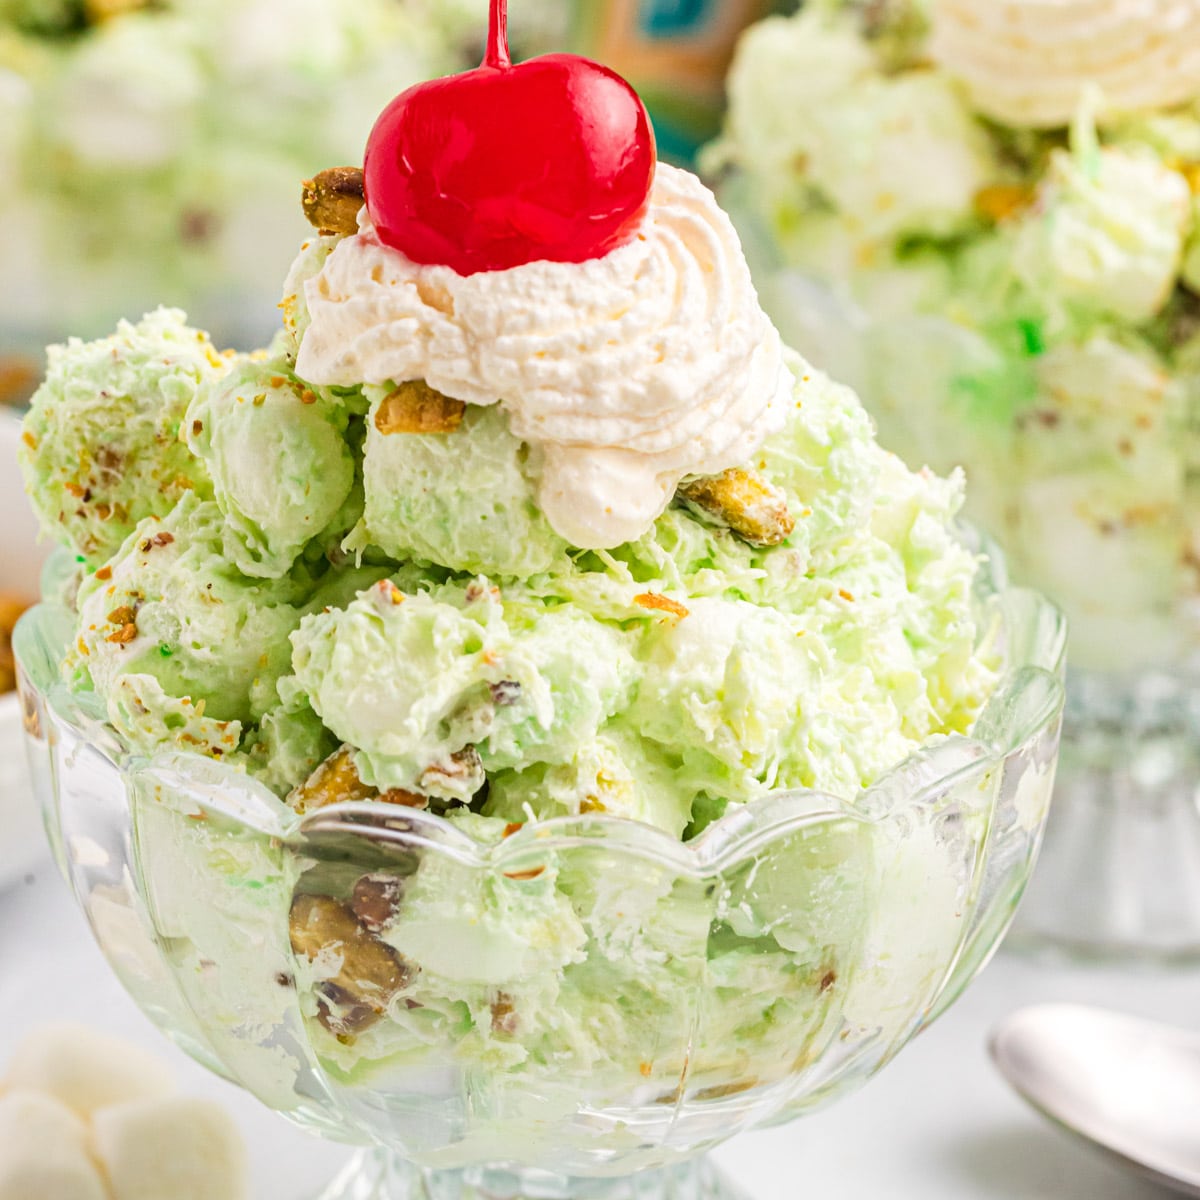 a small bowl of pistachio salad with a dollop of whipped cream and cherry on top